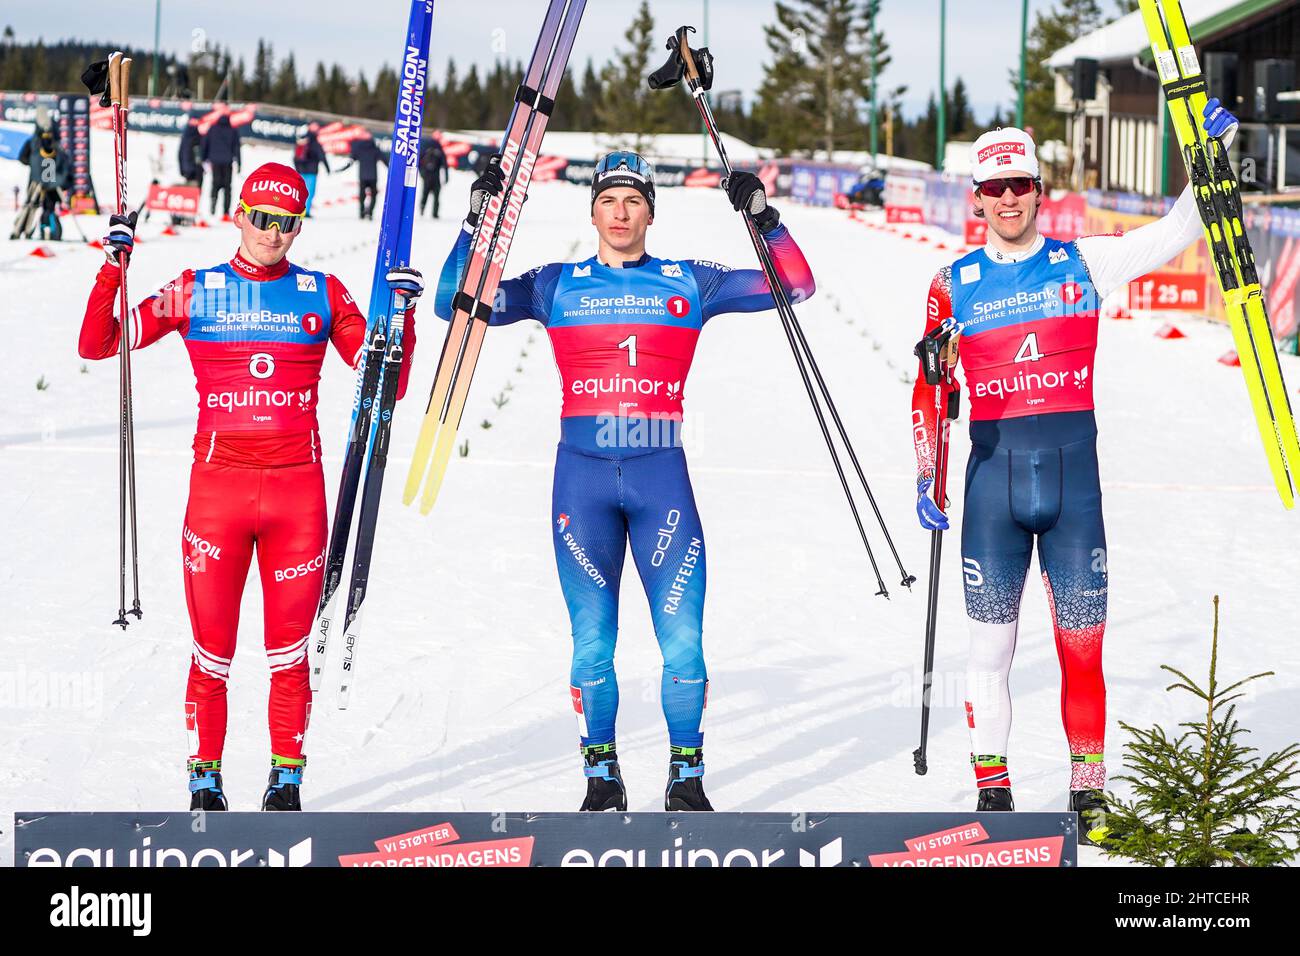 Lygna 20220226.Denis Filimonov from Russia (left) in second place, winner Valerio Grond from Switzerland and Magnus Øyaas Håbrekke from Norway in third place after the final of the 1.2 km sprint free technique for the U-23 World Ski Championships at Lygna. Photo: Terje Pedersen / NTB Stock Photo